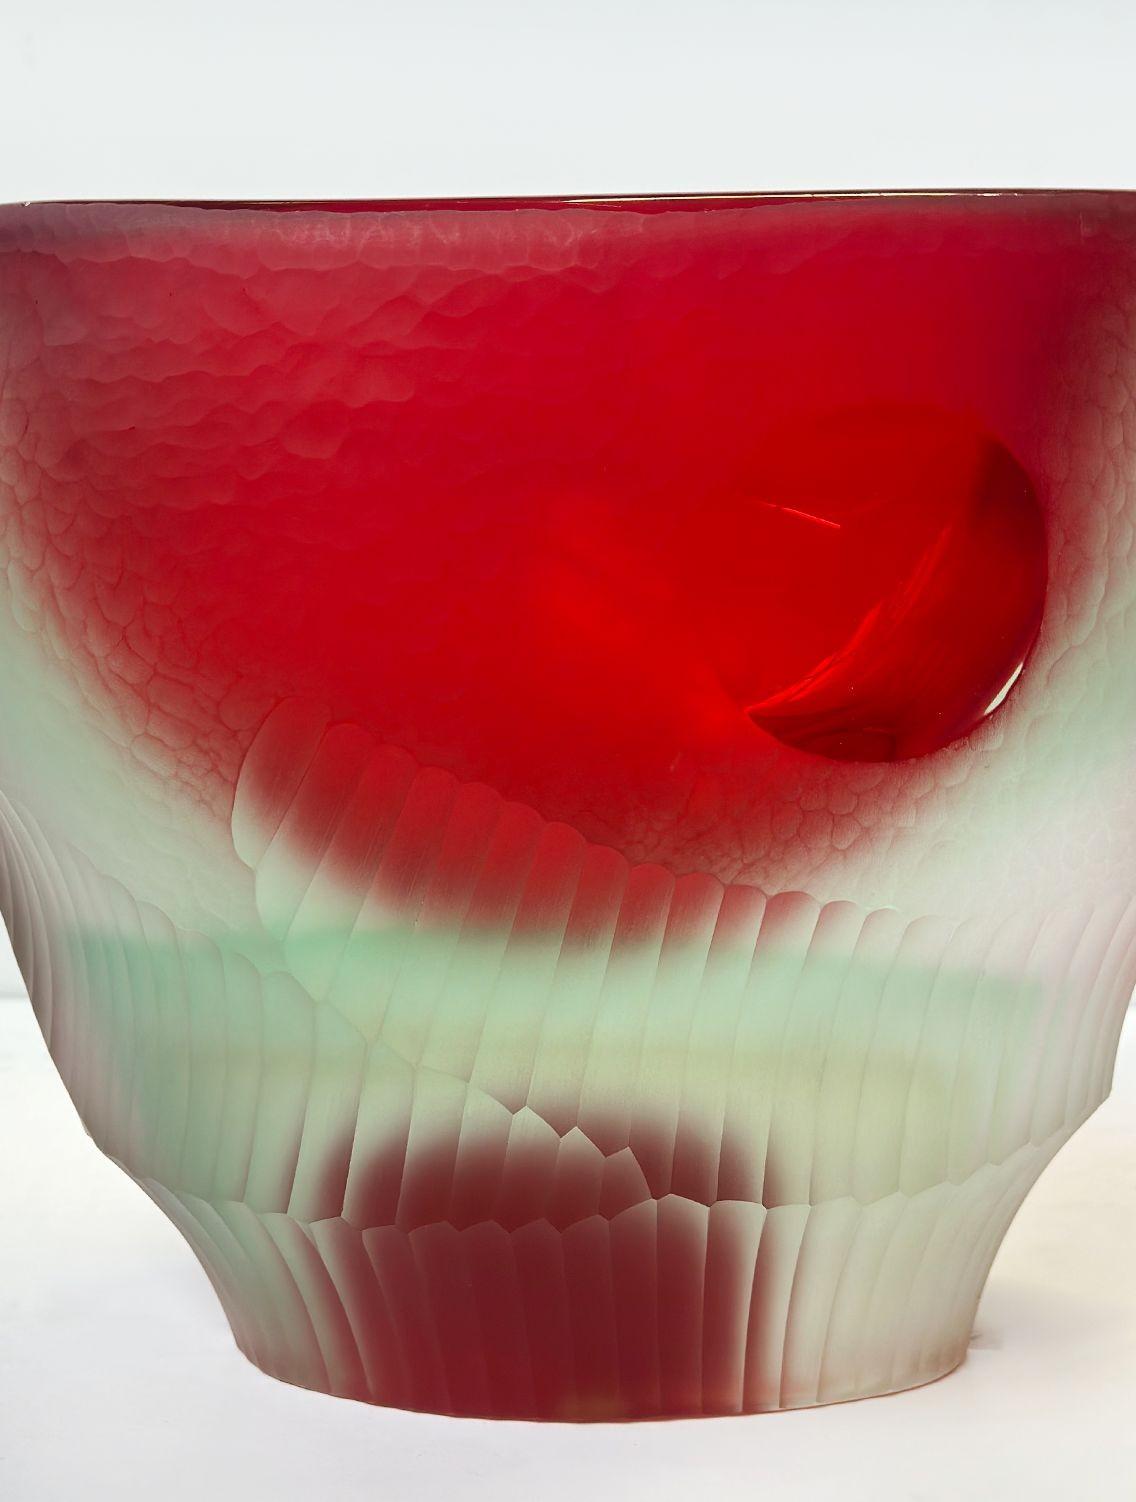 Beautiful vintage red and clear frosted Murano glass vase handblown in Sommerso technique where the glass is submerged and etched to create a stunning, multi-dimensional effect. Made in Italy, circa 1960 by Romano Dona. Signed on the base 